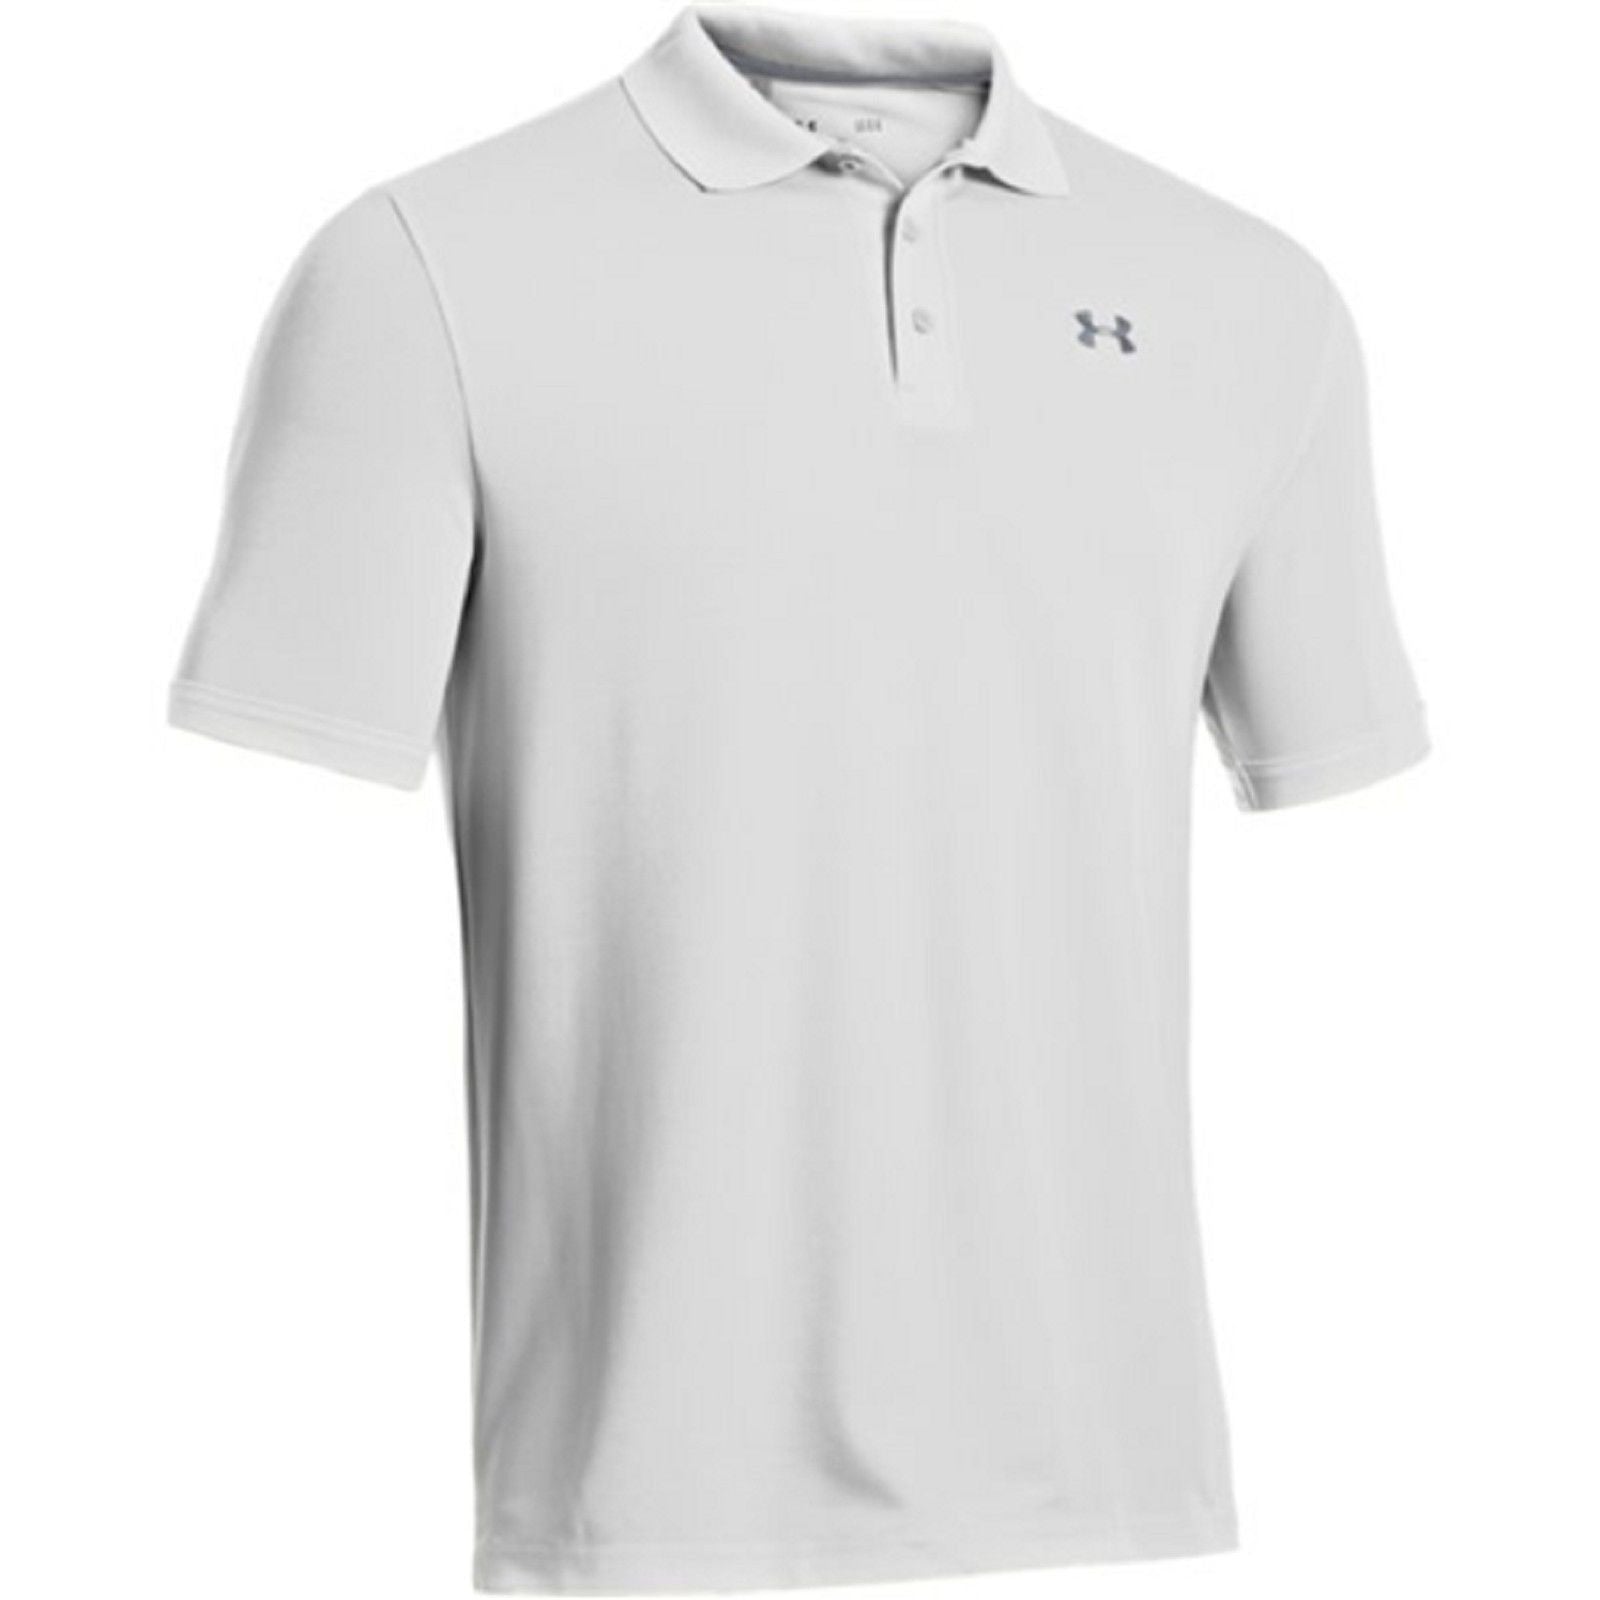 Under Armour Performance Polo Shirt - UA Full & Loose Fit Collared Gol ...